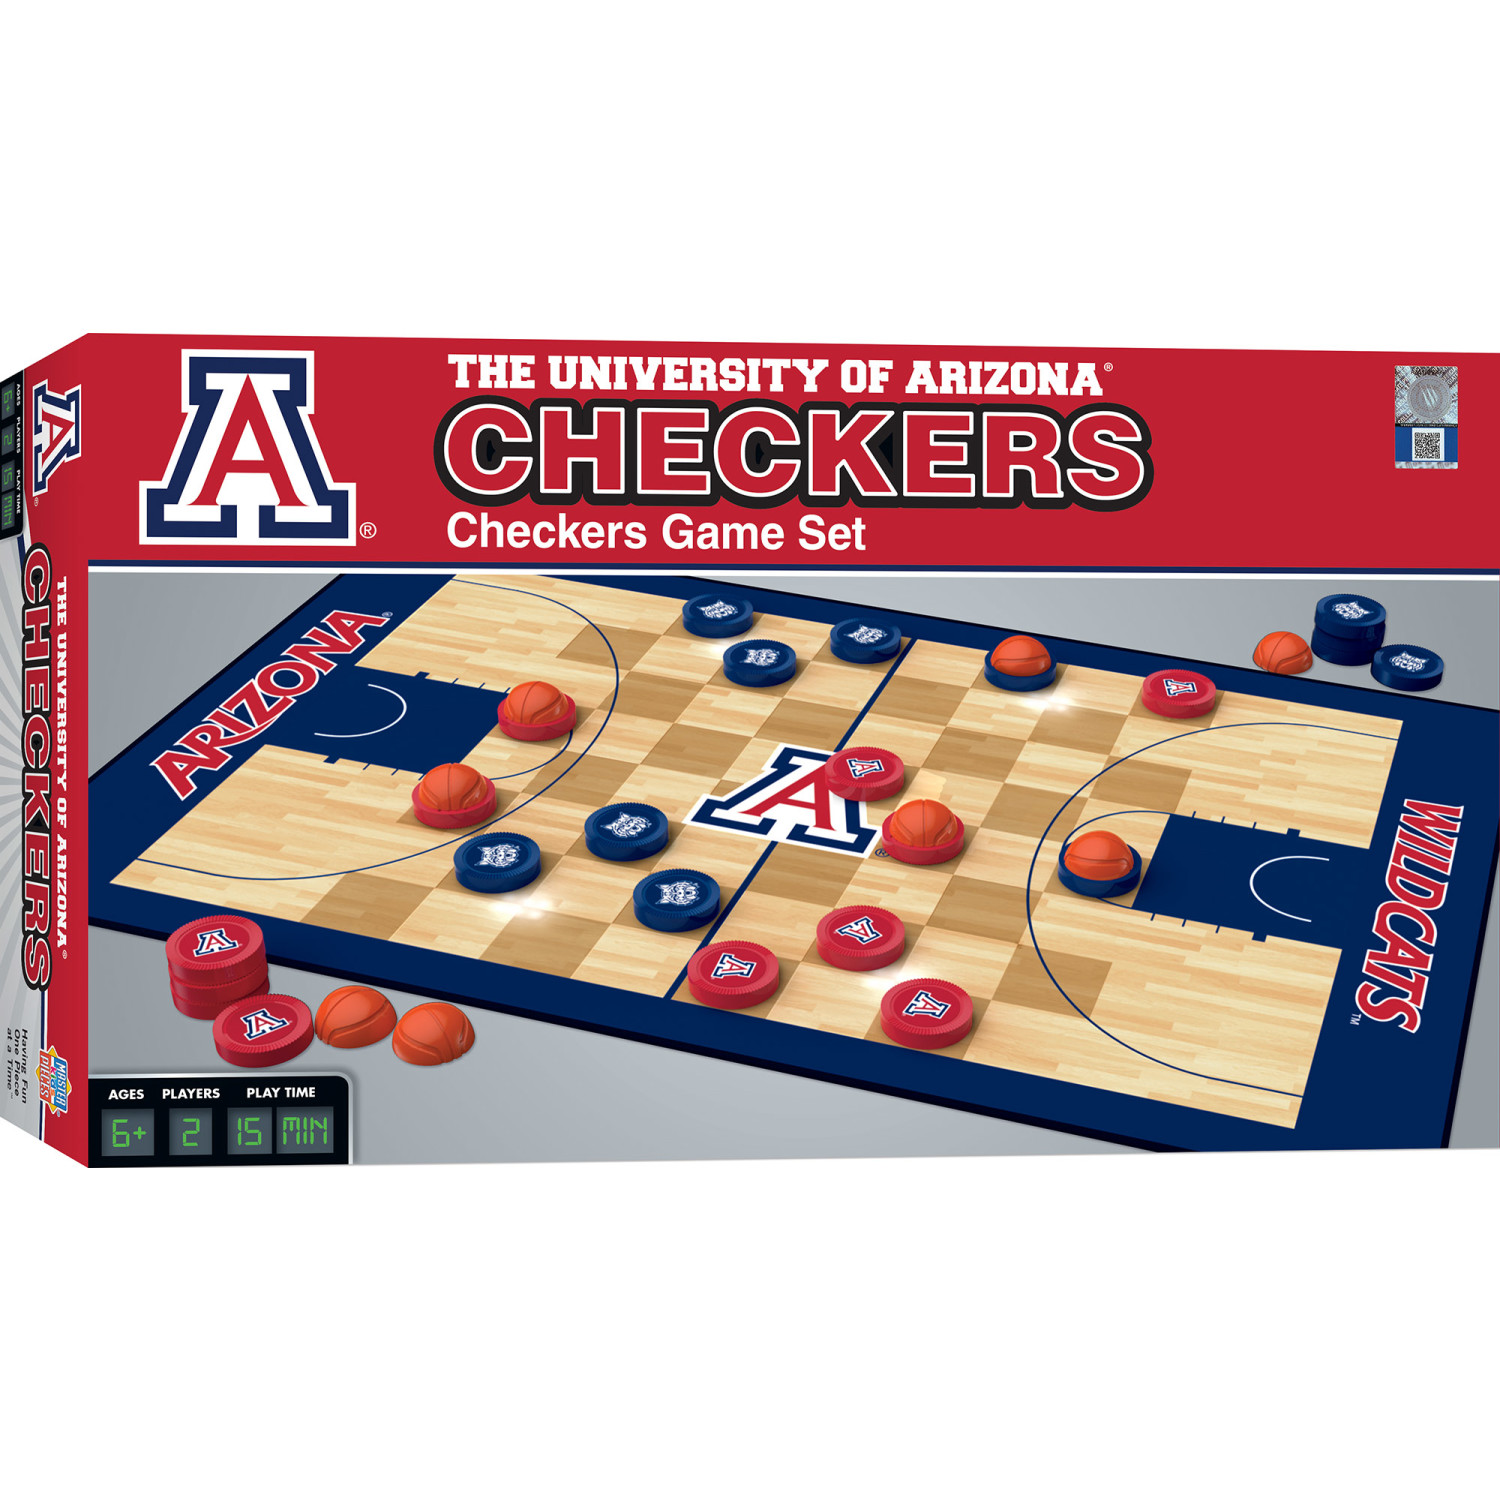 MasterPieces Officially licensed NCAA Arizona Wildcats Checkers Board Game for Families and Kids ages 6 and Up - image 2 of 5